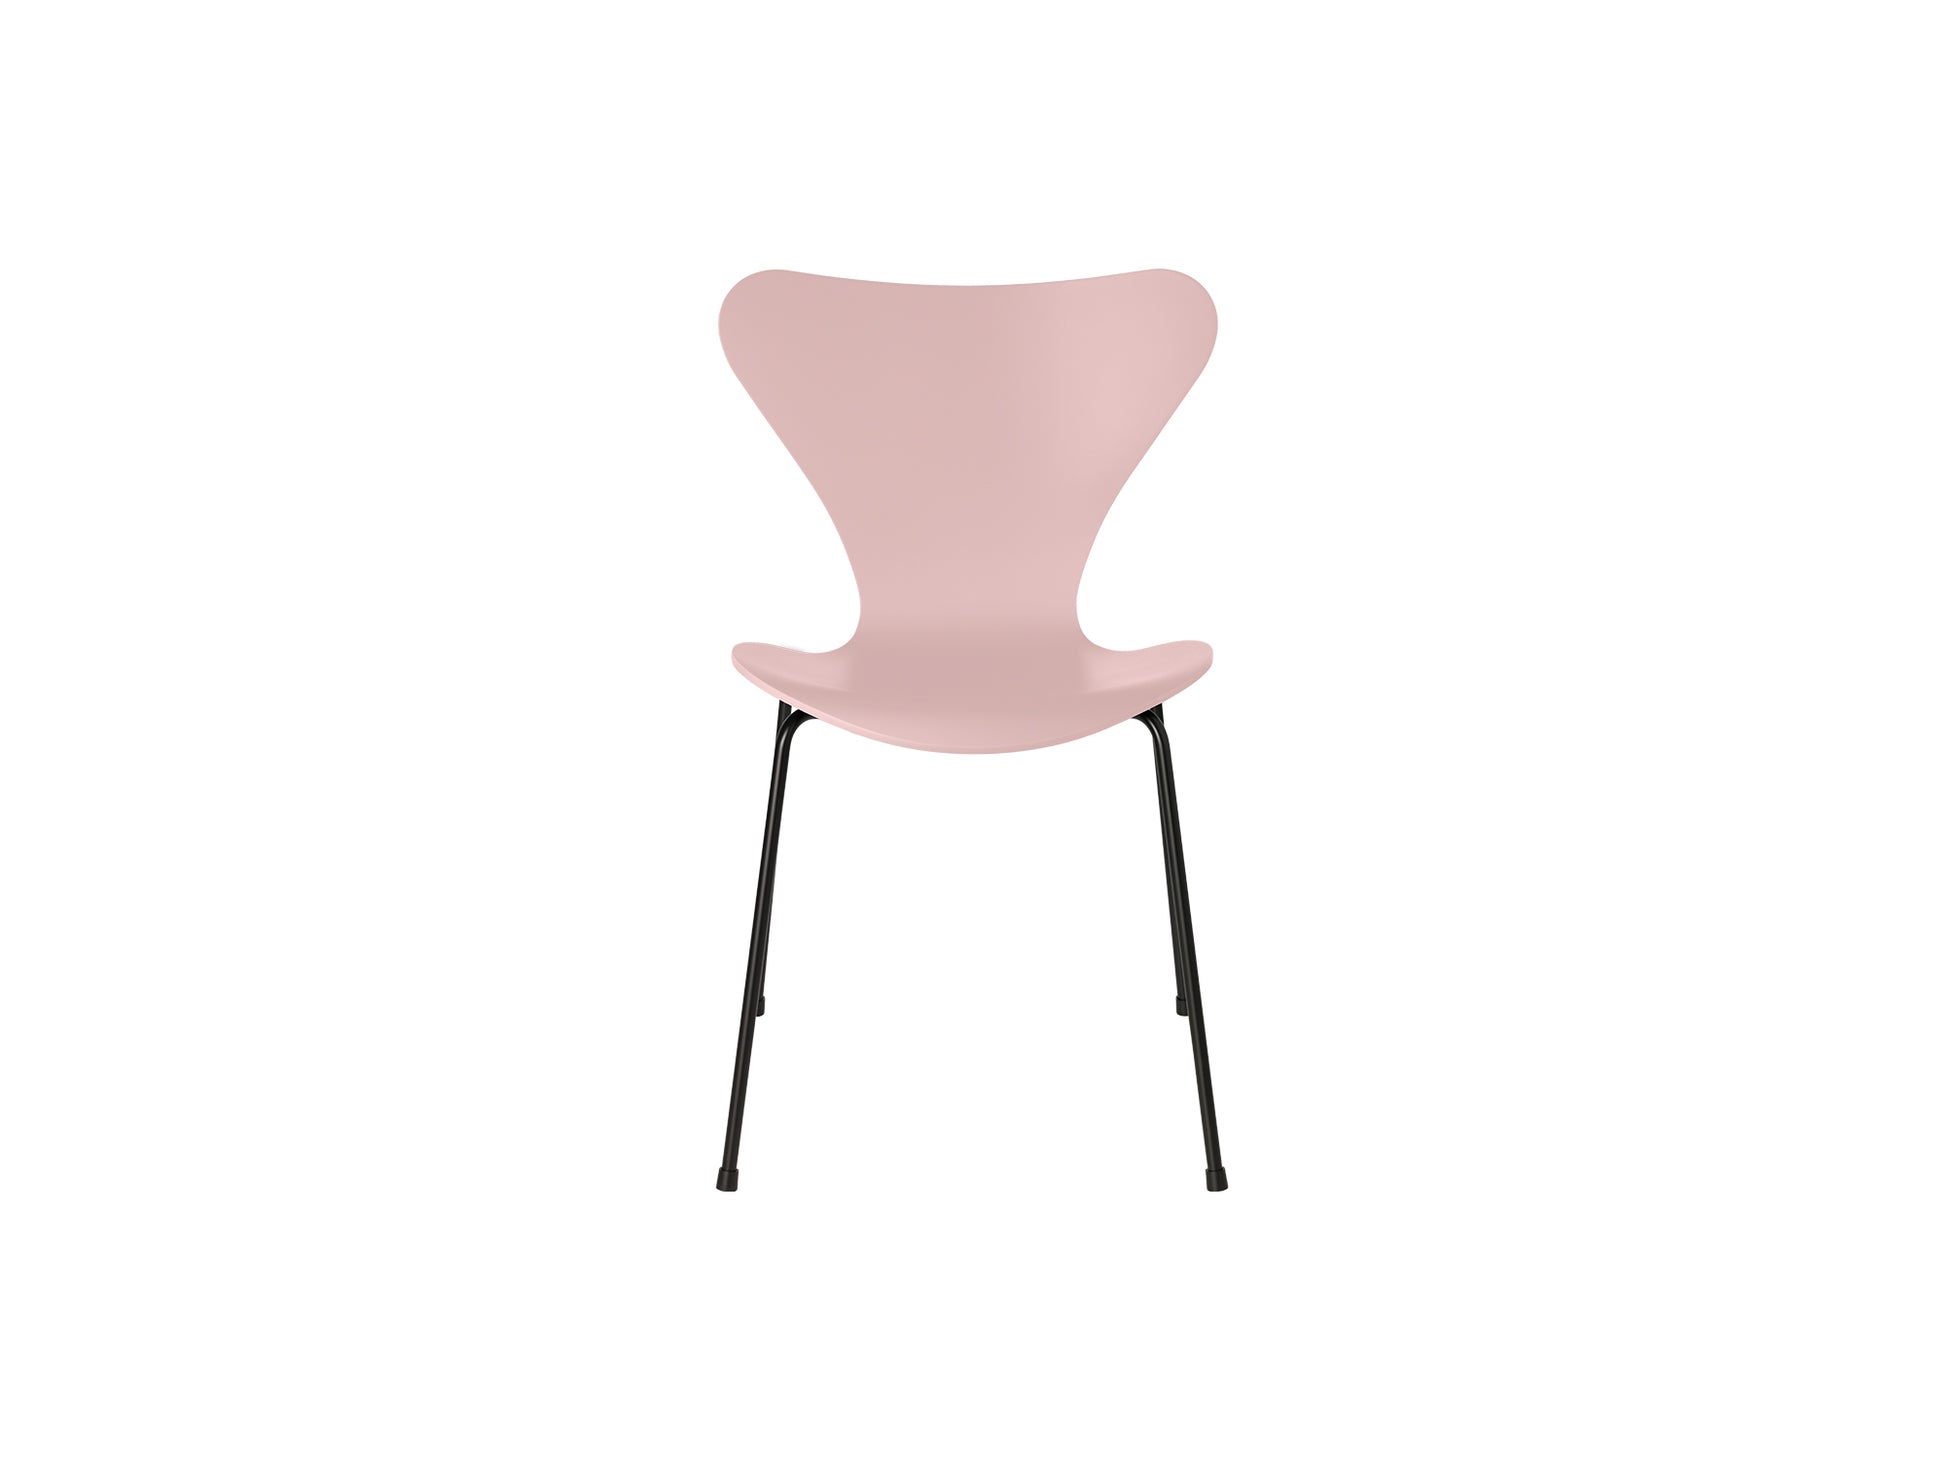 Series 7™ 3107 Dining Chair by Fritz Hansen - Pale Rose Lacquered Veneer Shell / Black Steel